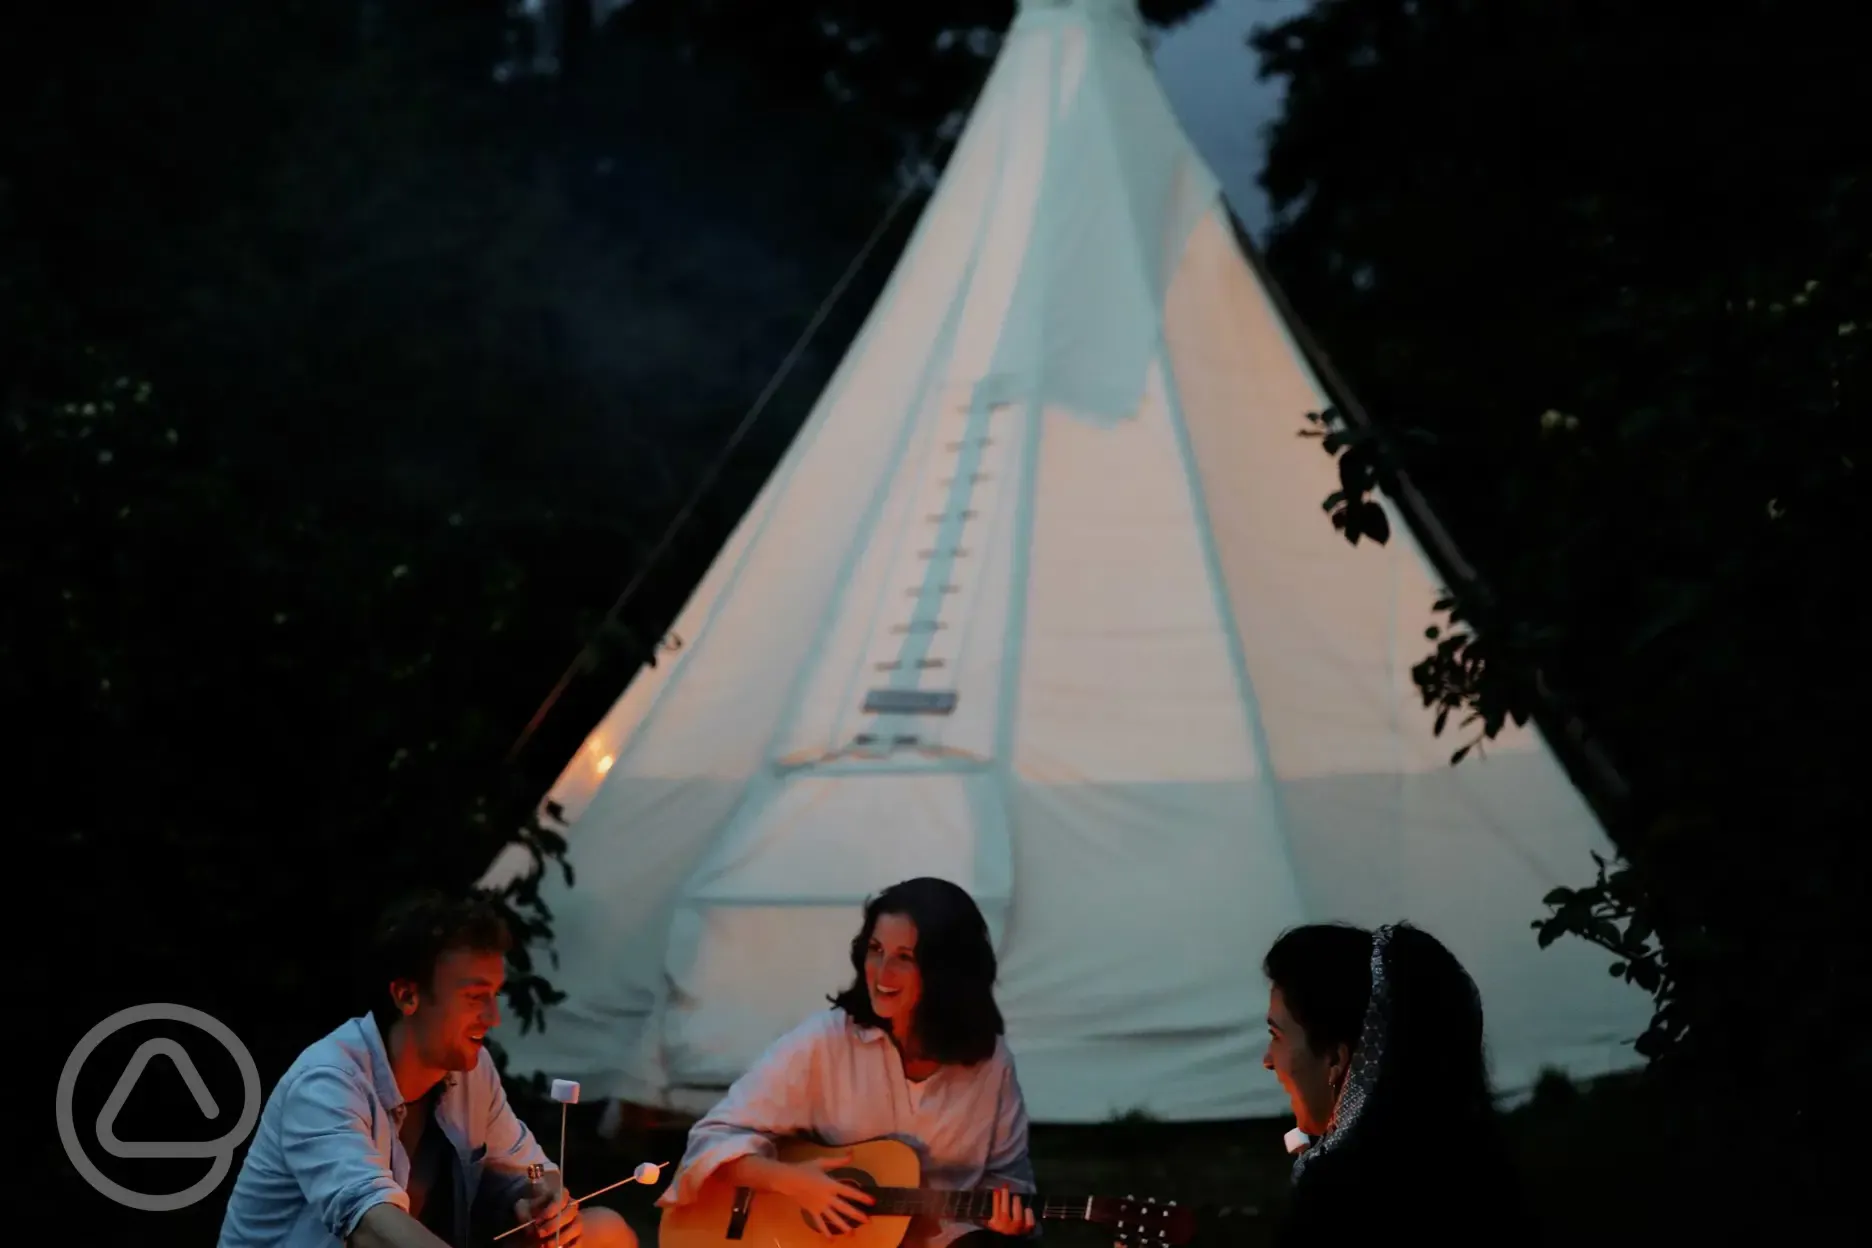 Campfire by your tipi